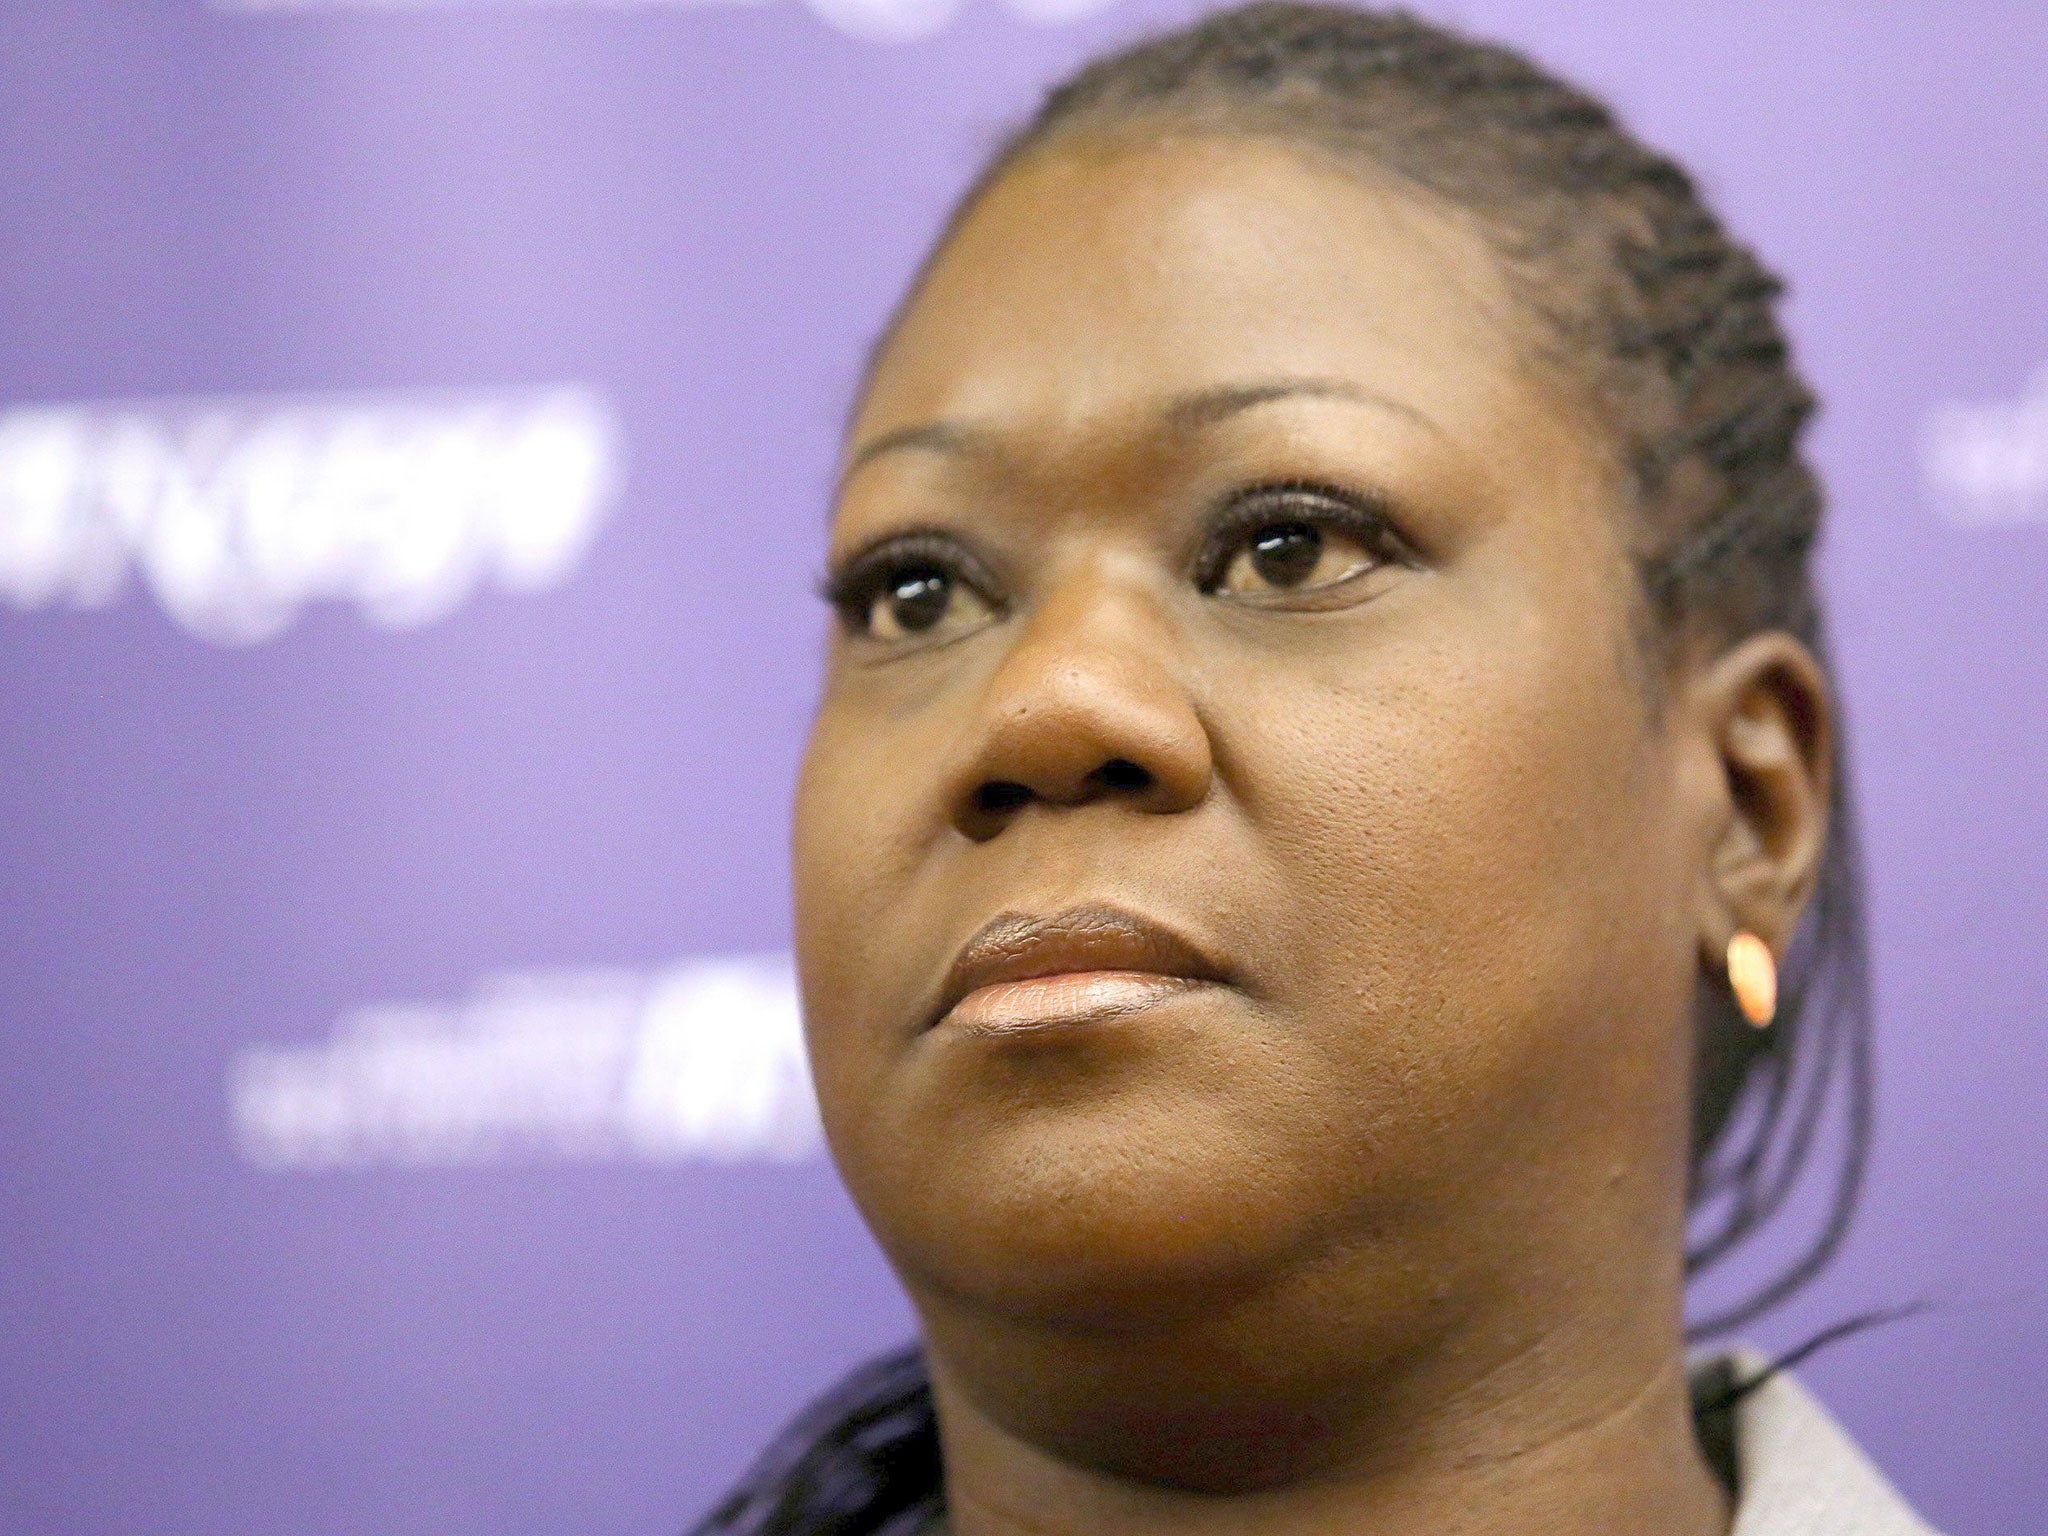 Sybrina Fulton, the mother of Trayvon Martin, who was shot dead in 2012